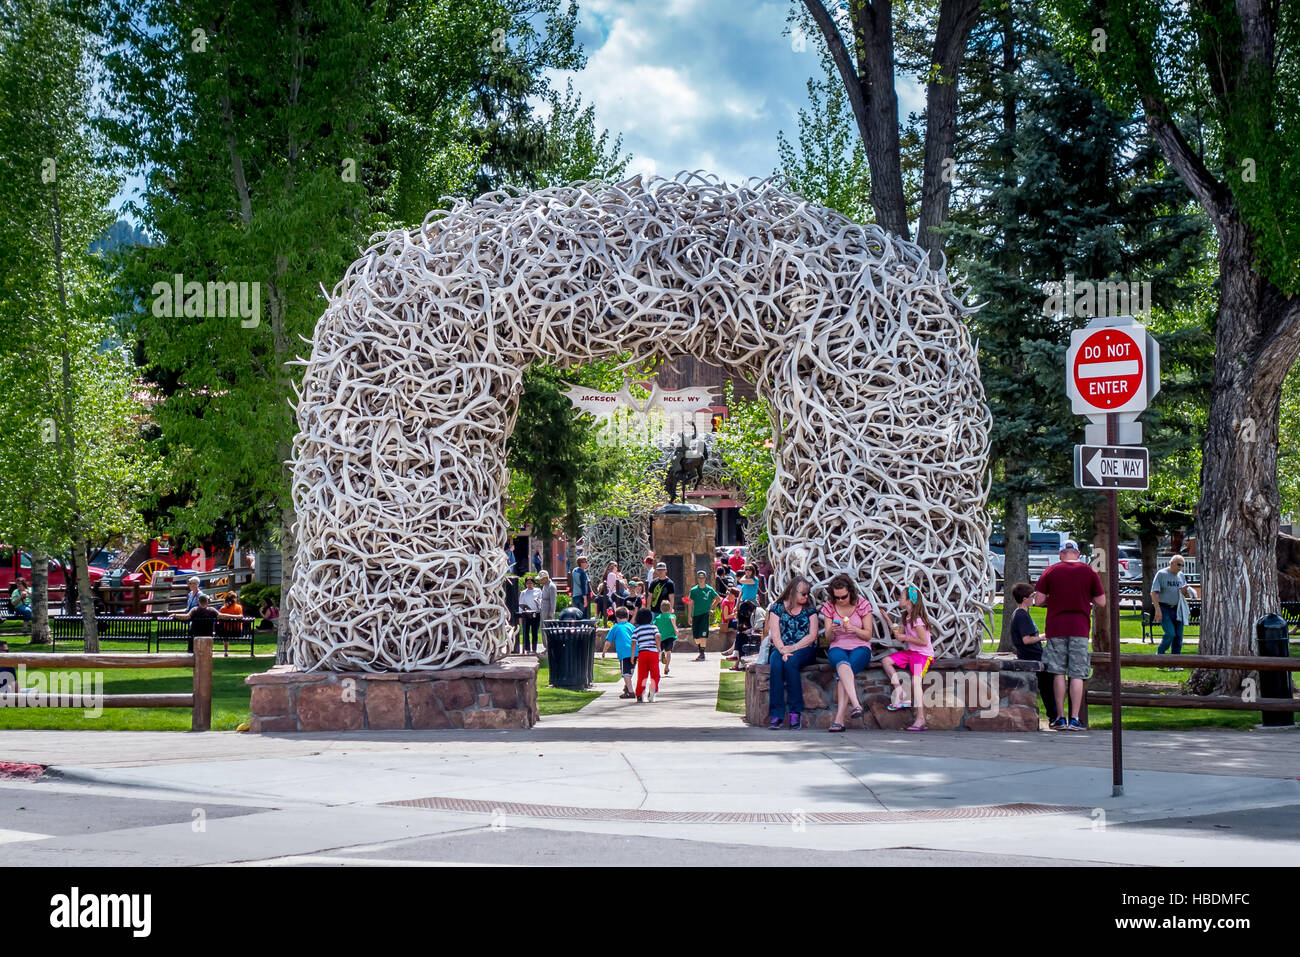 Park entrance in Jackson Hole, Wyoming created by thousands of discarded elk antlers piled up Stock Photo